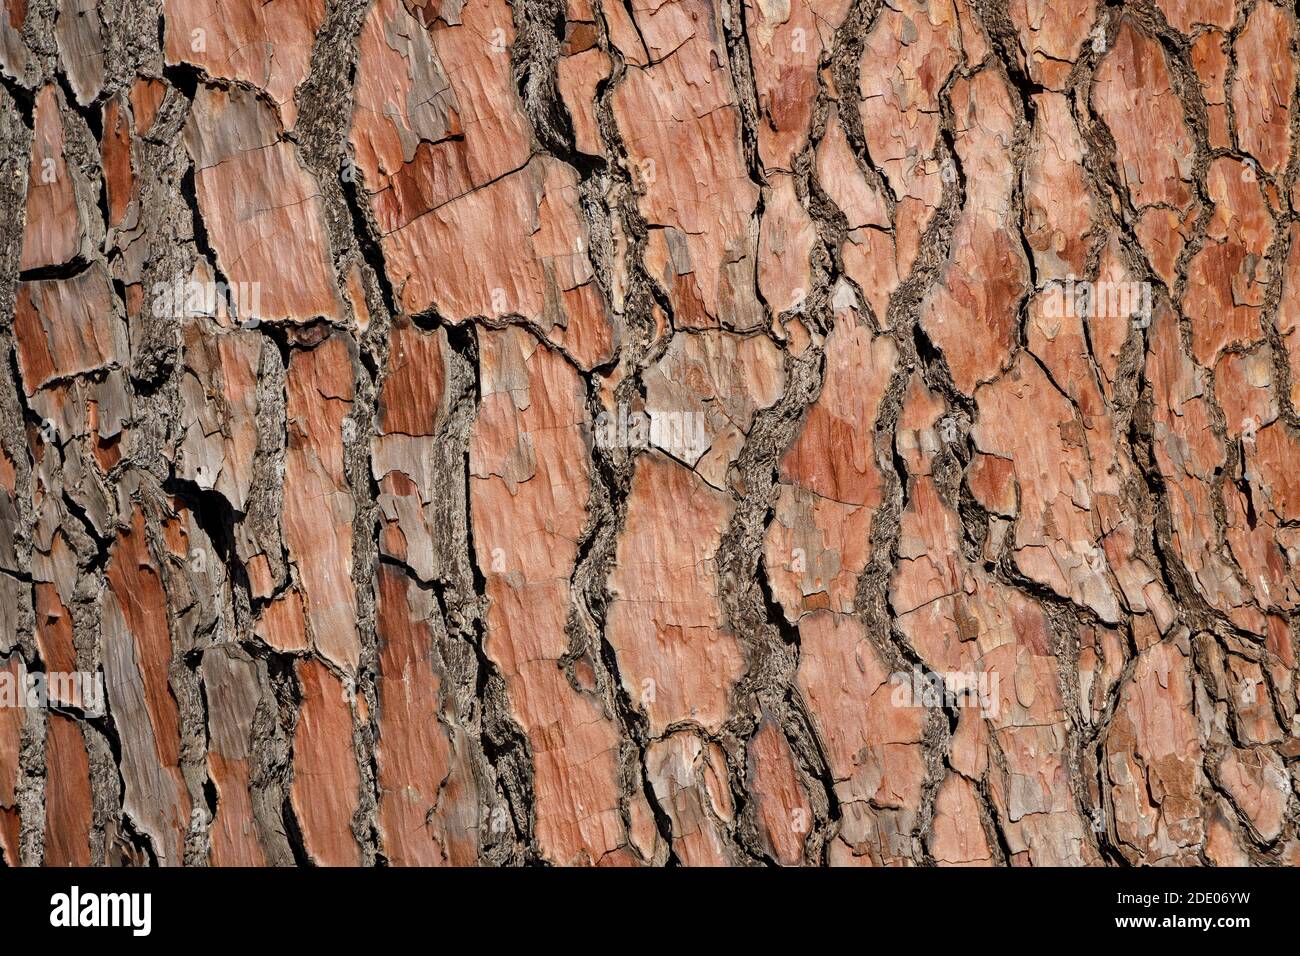 Textured tree bark surface with a red tint. Stock Photo